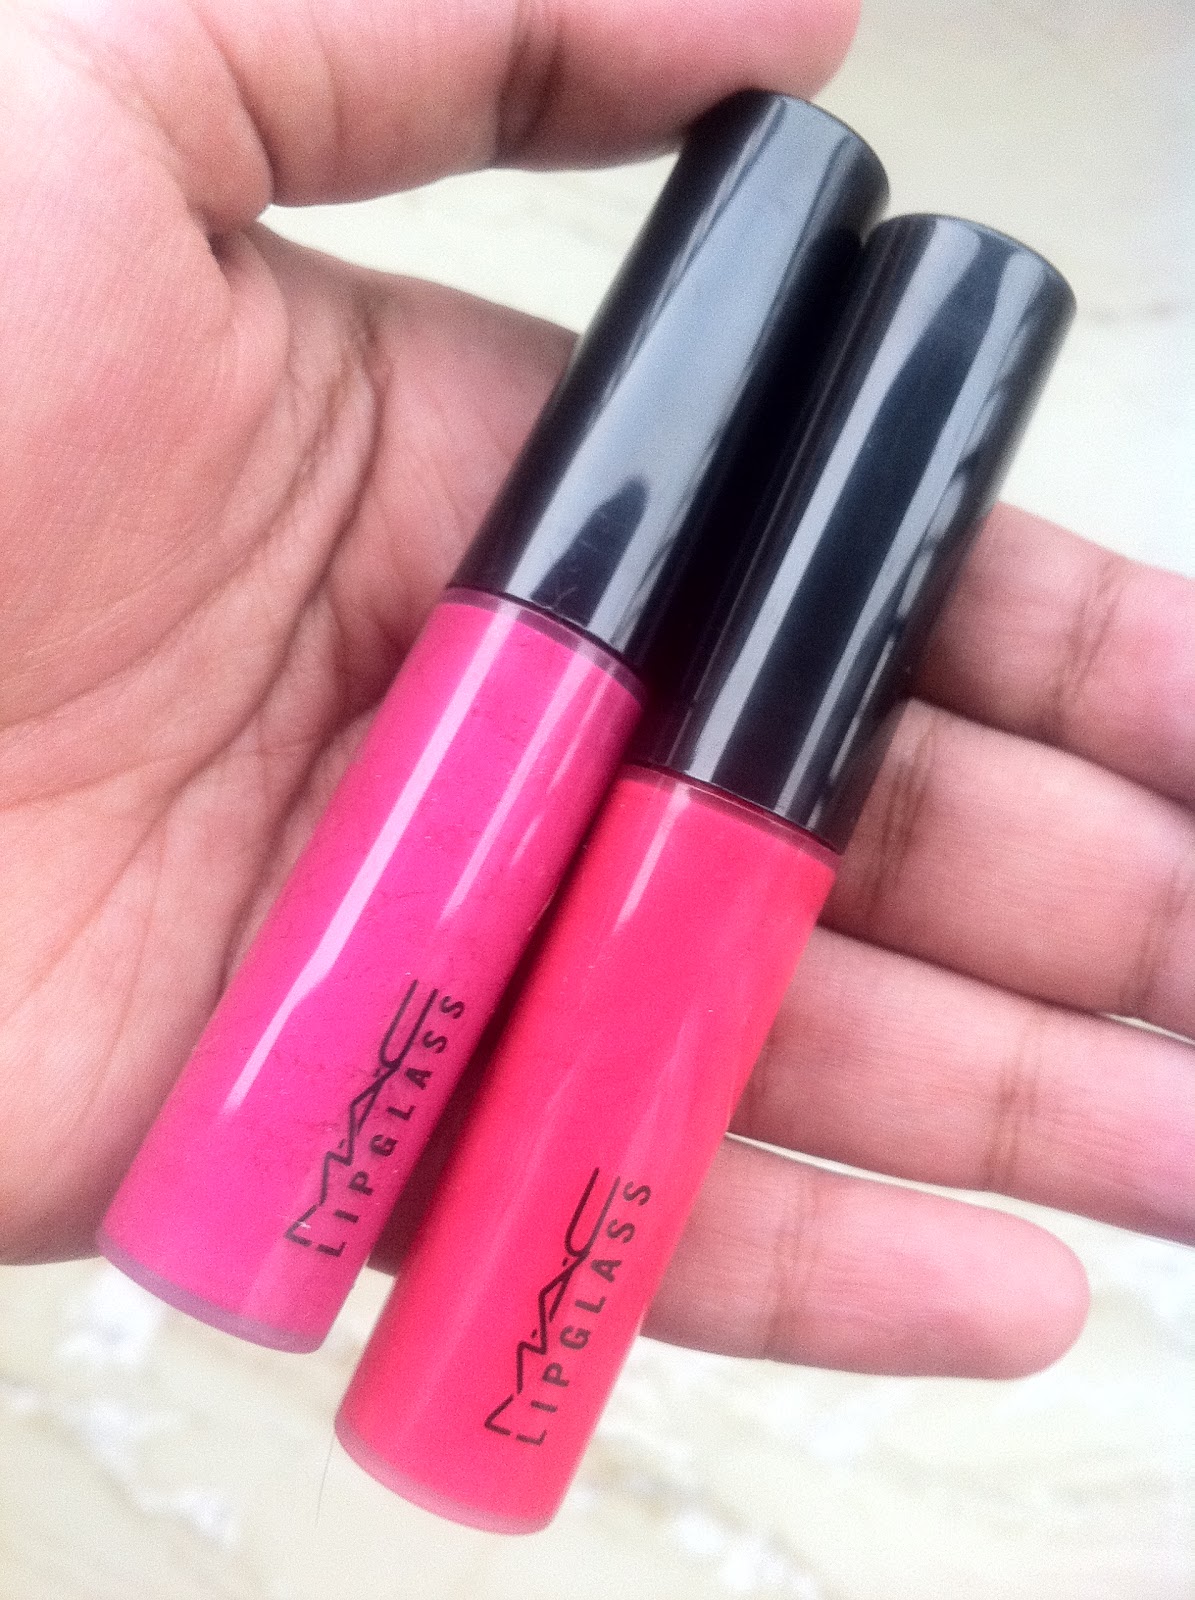 Mac Girl About Town Impassioned Lip Glass Review Swatch Make Up Beauty Fashion